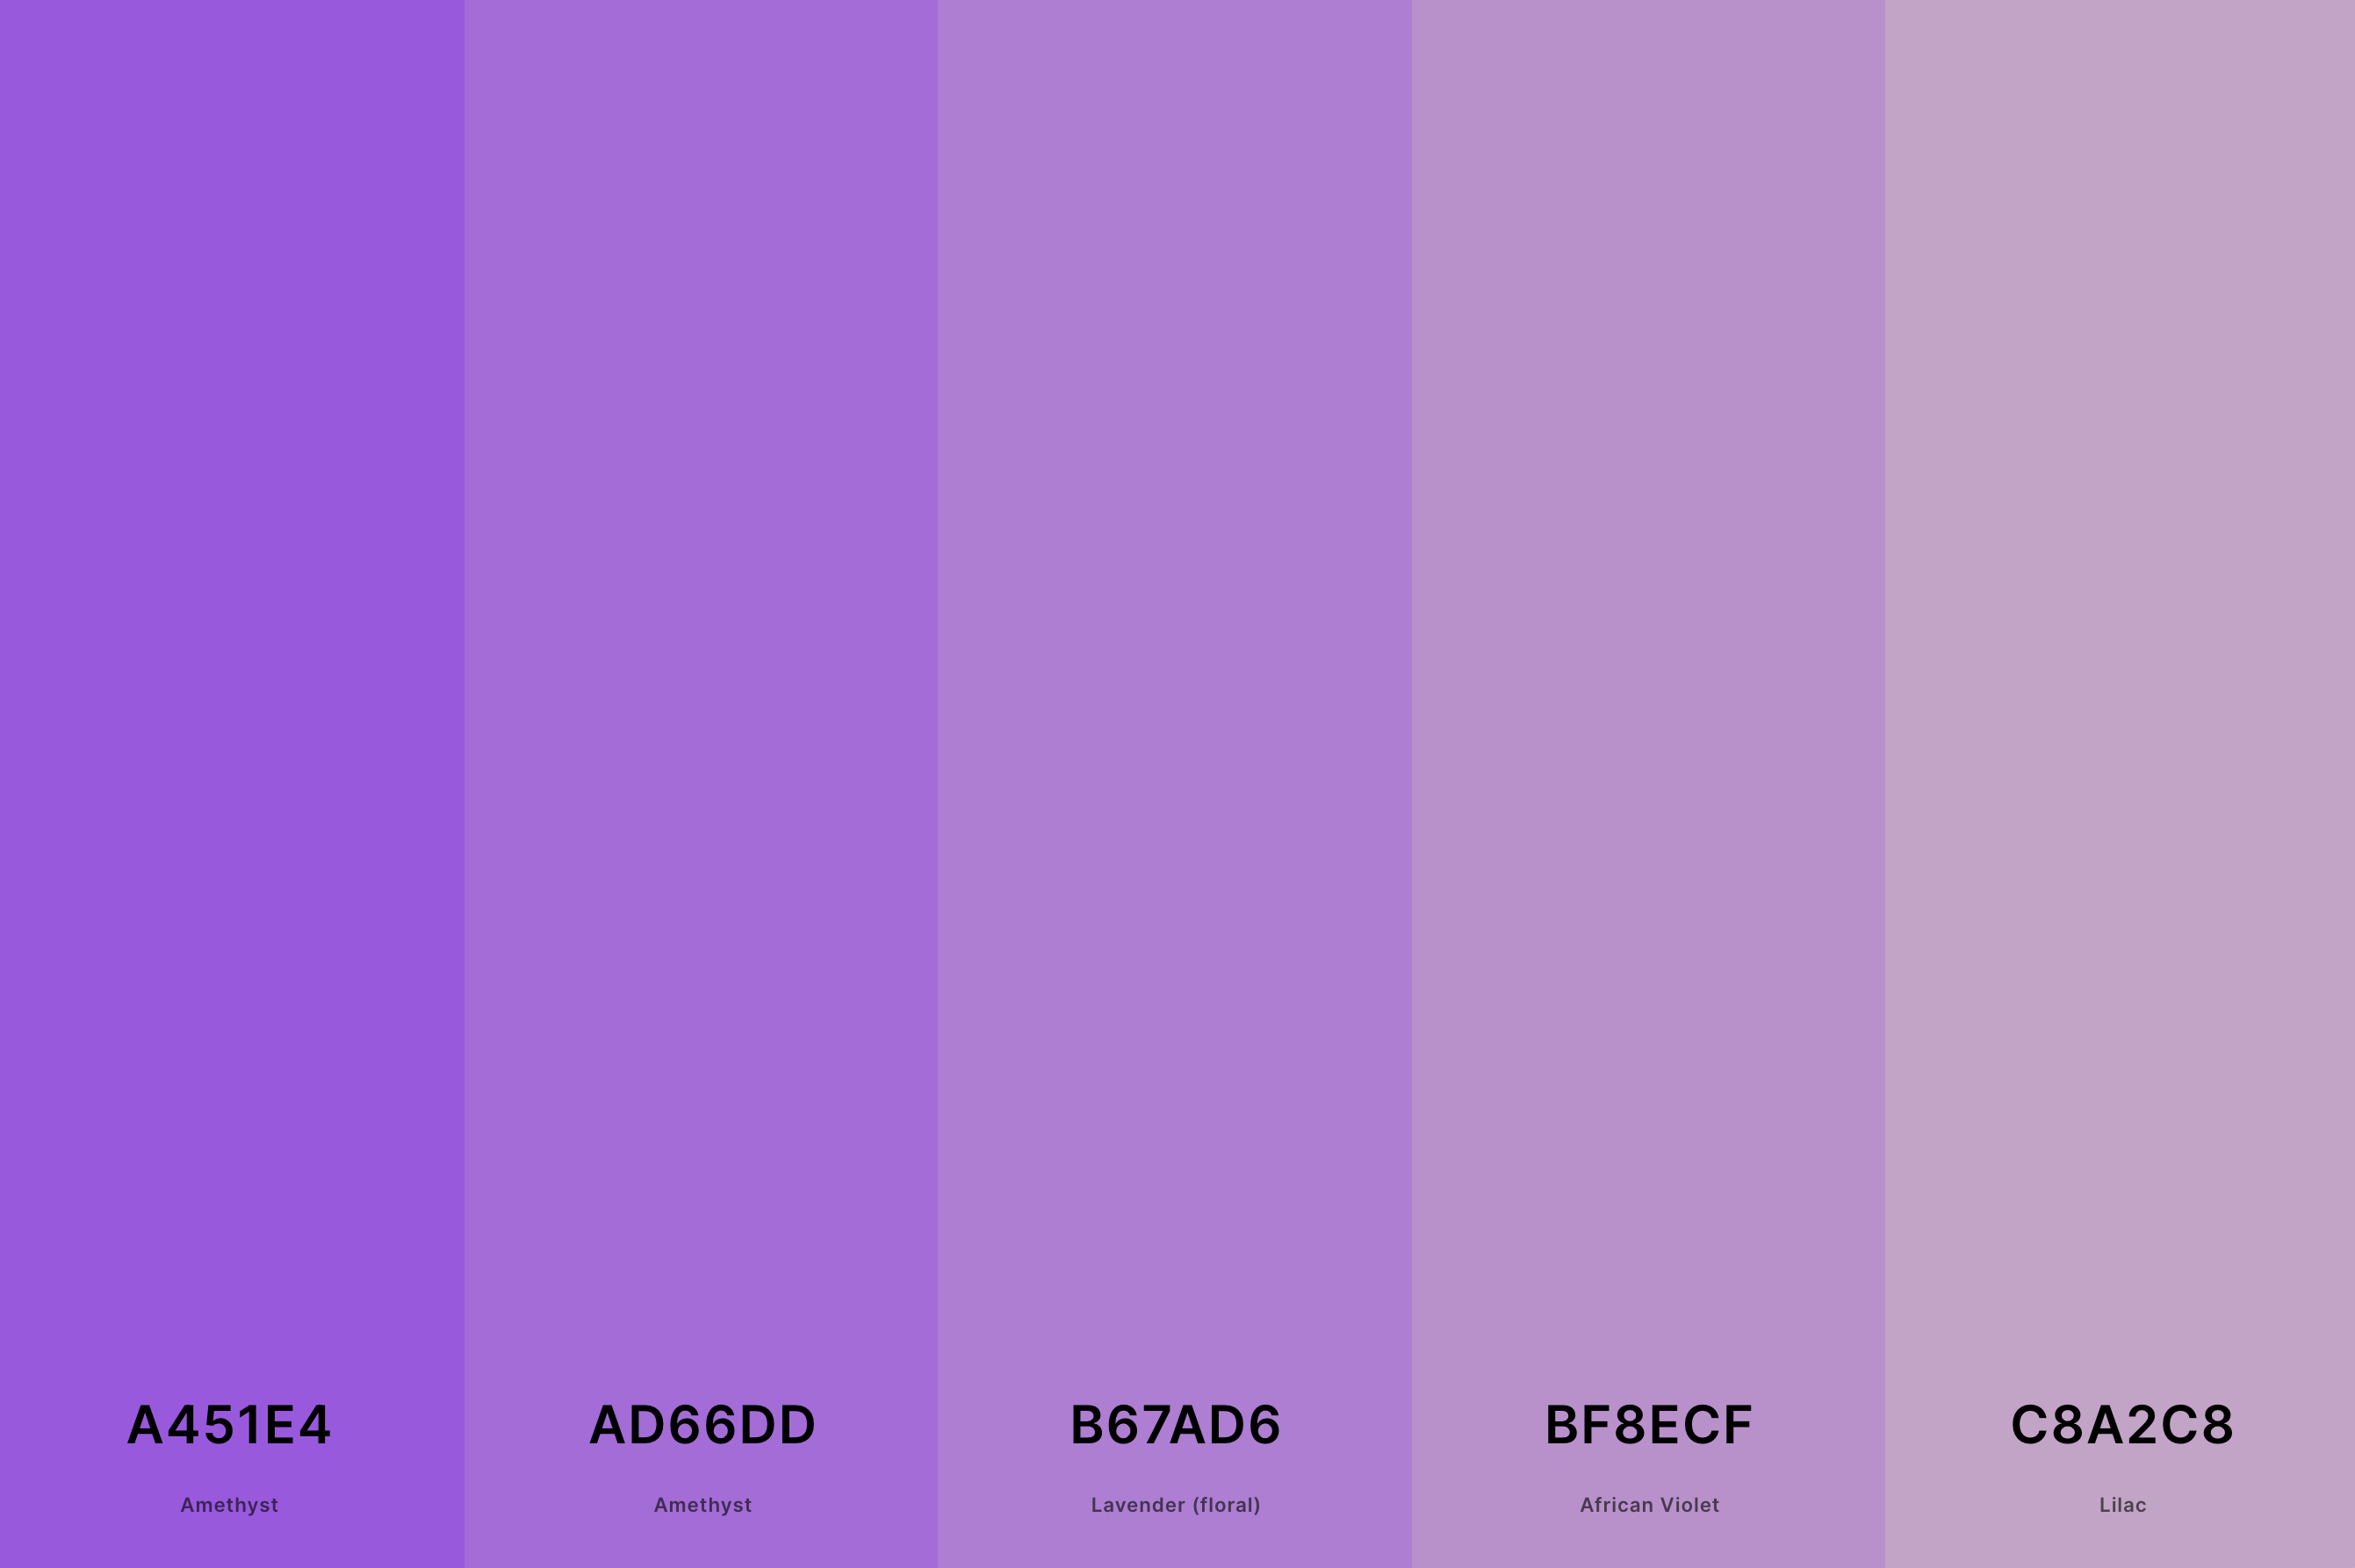 9. Violet And Lilac Color Palette Color Palette with Amethyst (Hex #A451E4) + Amethyst (Hex #AD66DD) + Lavender (Floral) (Hex #B67AD6) + African Violet (Hex #BF8ECF) + Lilac (Hex #C8A2C8) Color Palette with Hex Codes